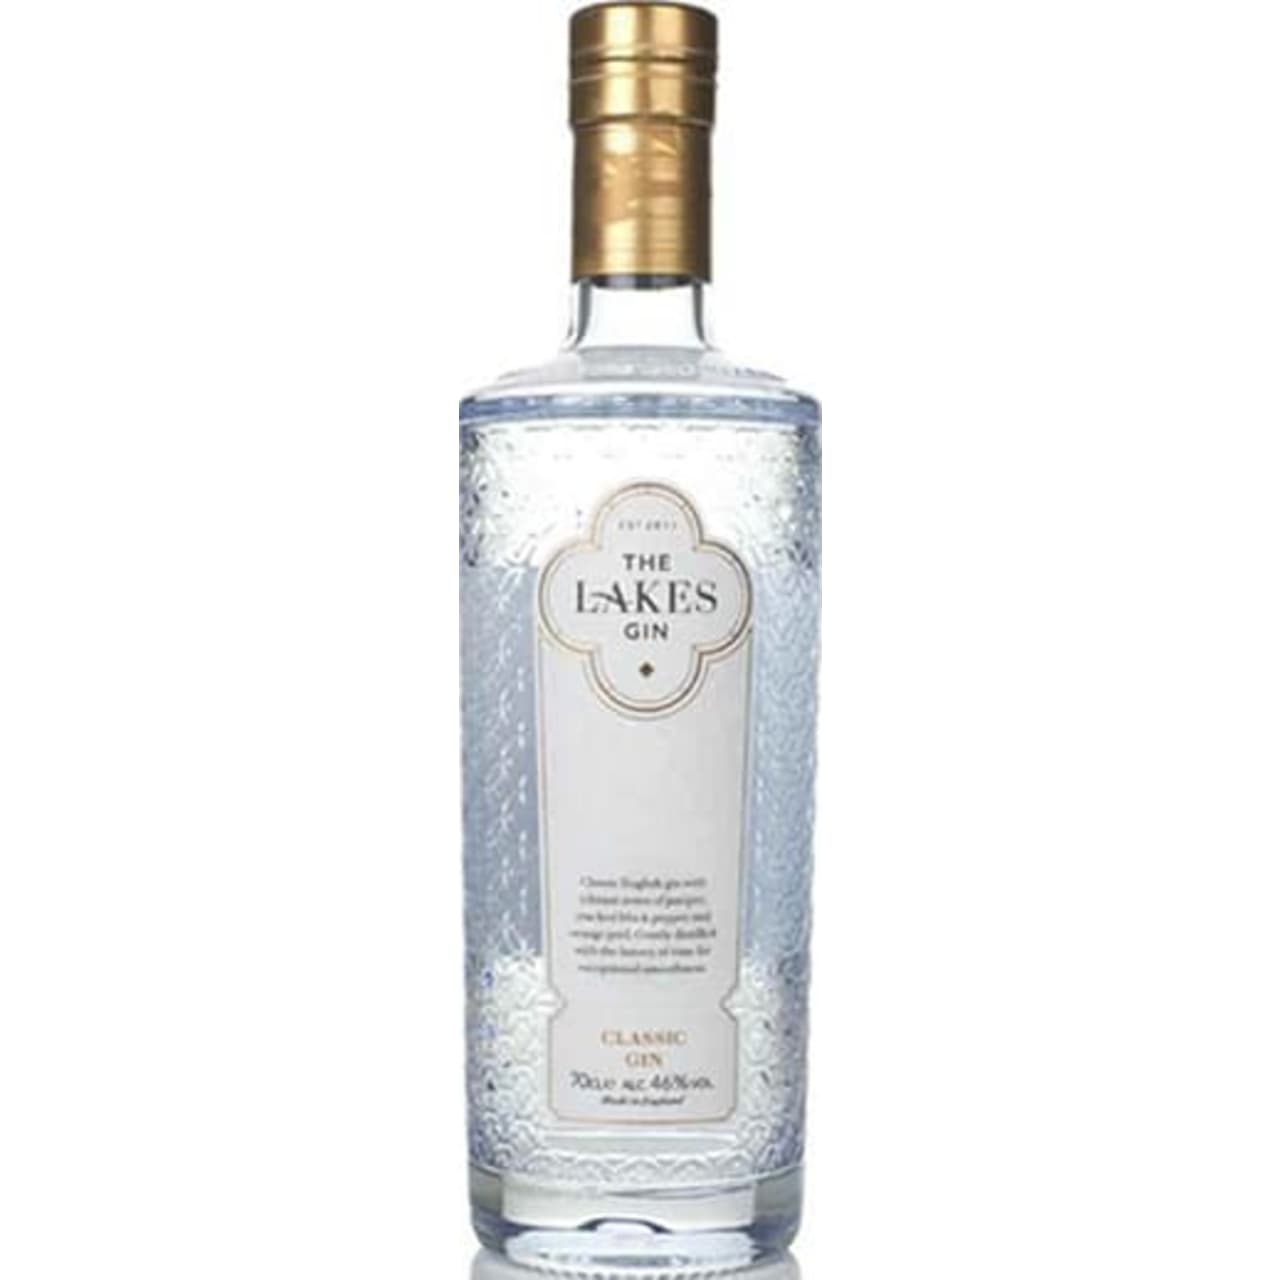 Product Image - The Lakes Classic Gin